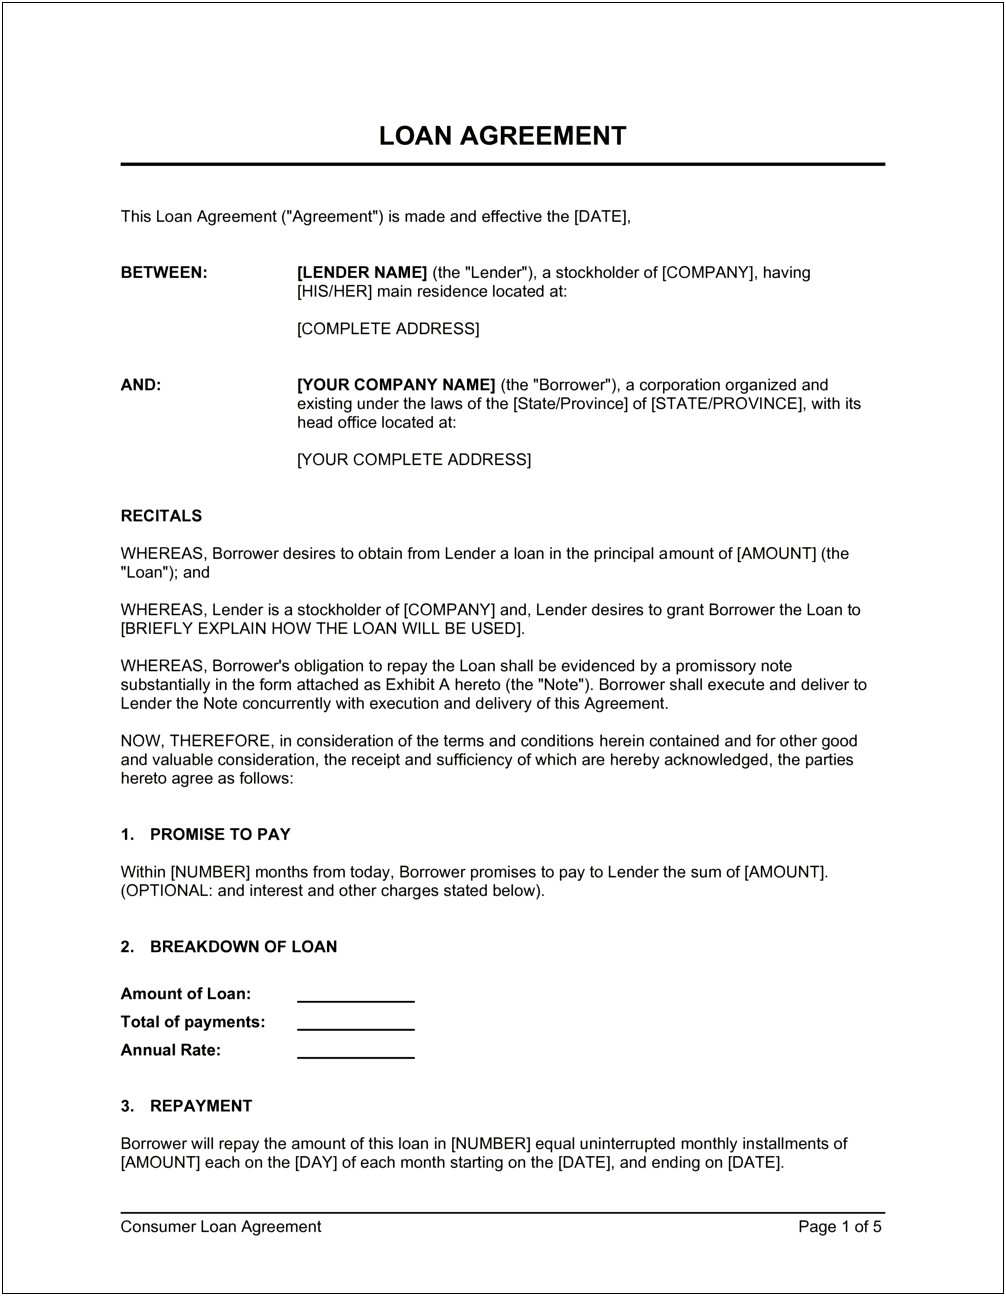 Simple Equipment Loan Agreement Template Free